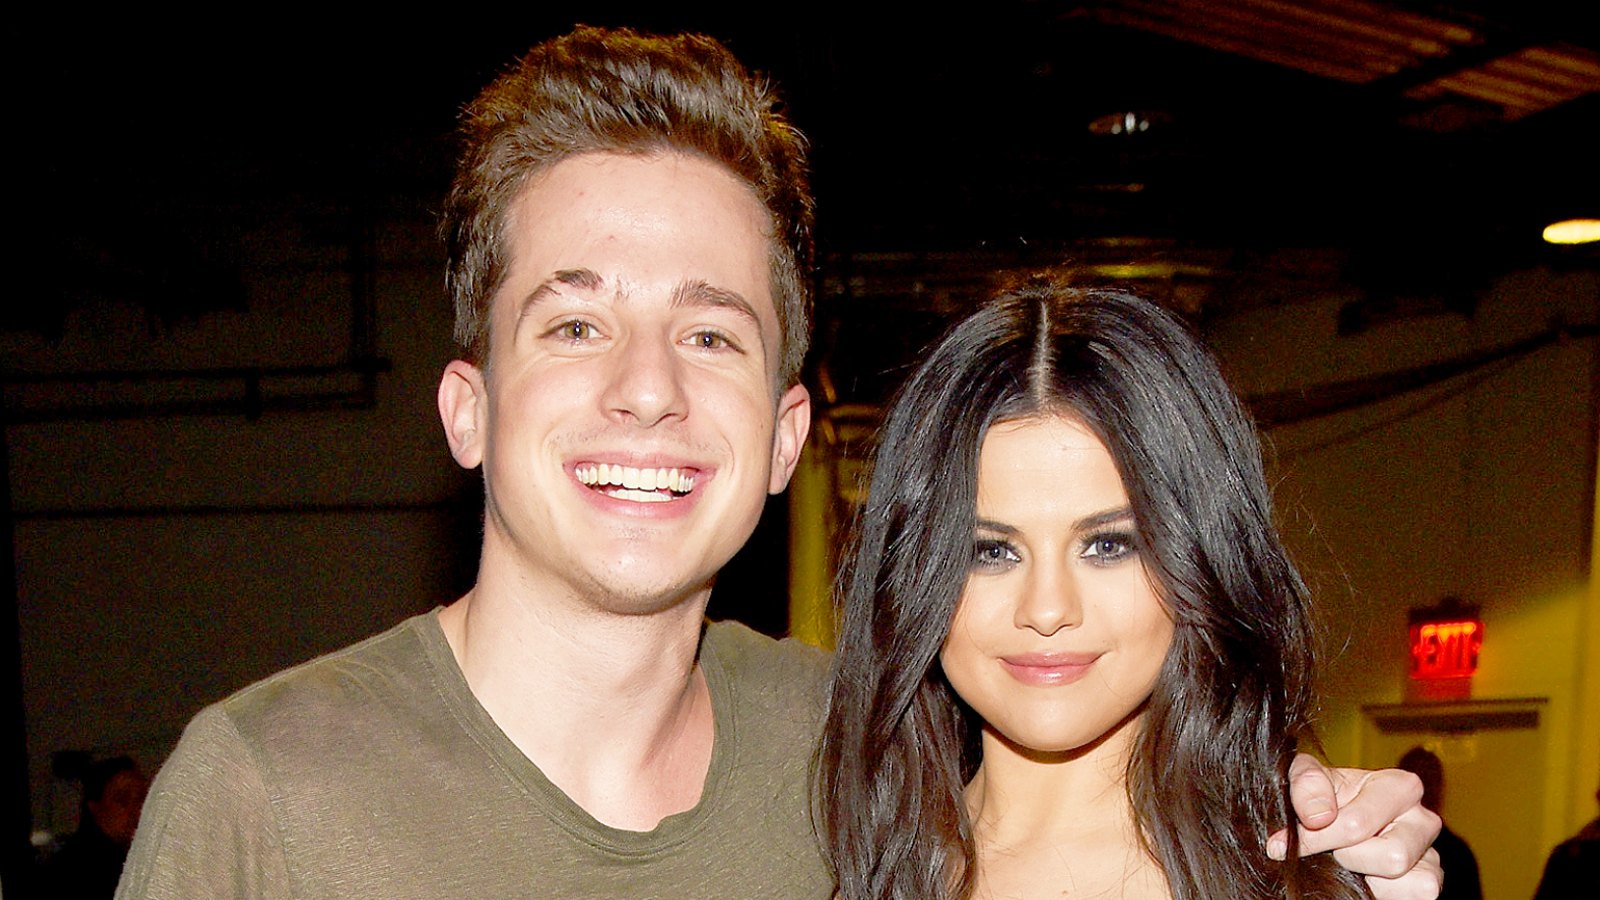 Charlie Puth and Selena Gomez attend Z100's Jingle Ball 2015 at Madison Square Garden in New York City.